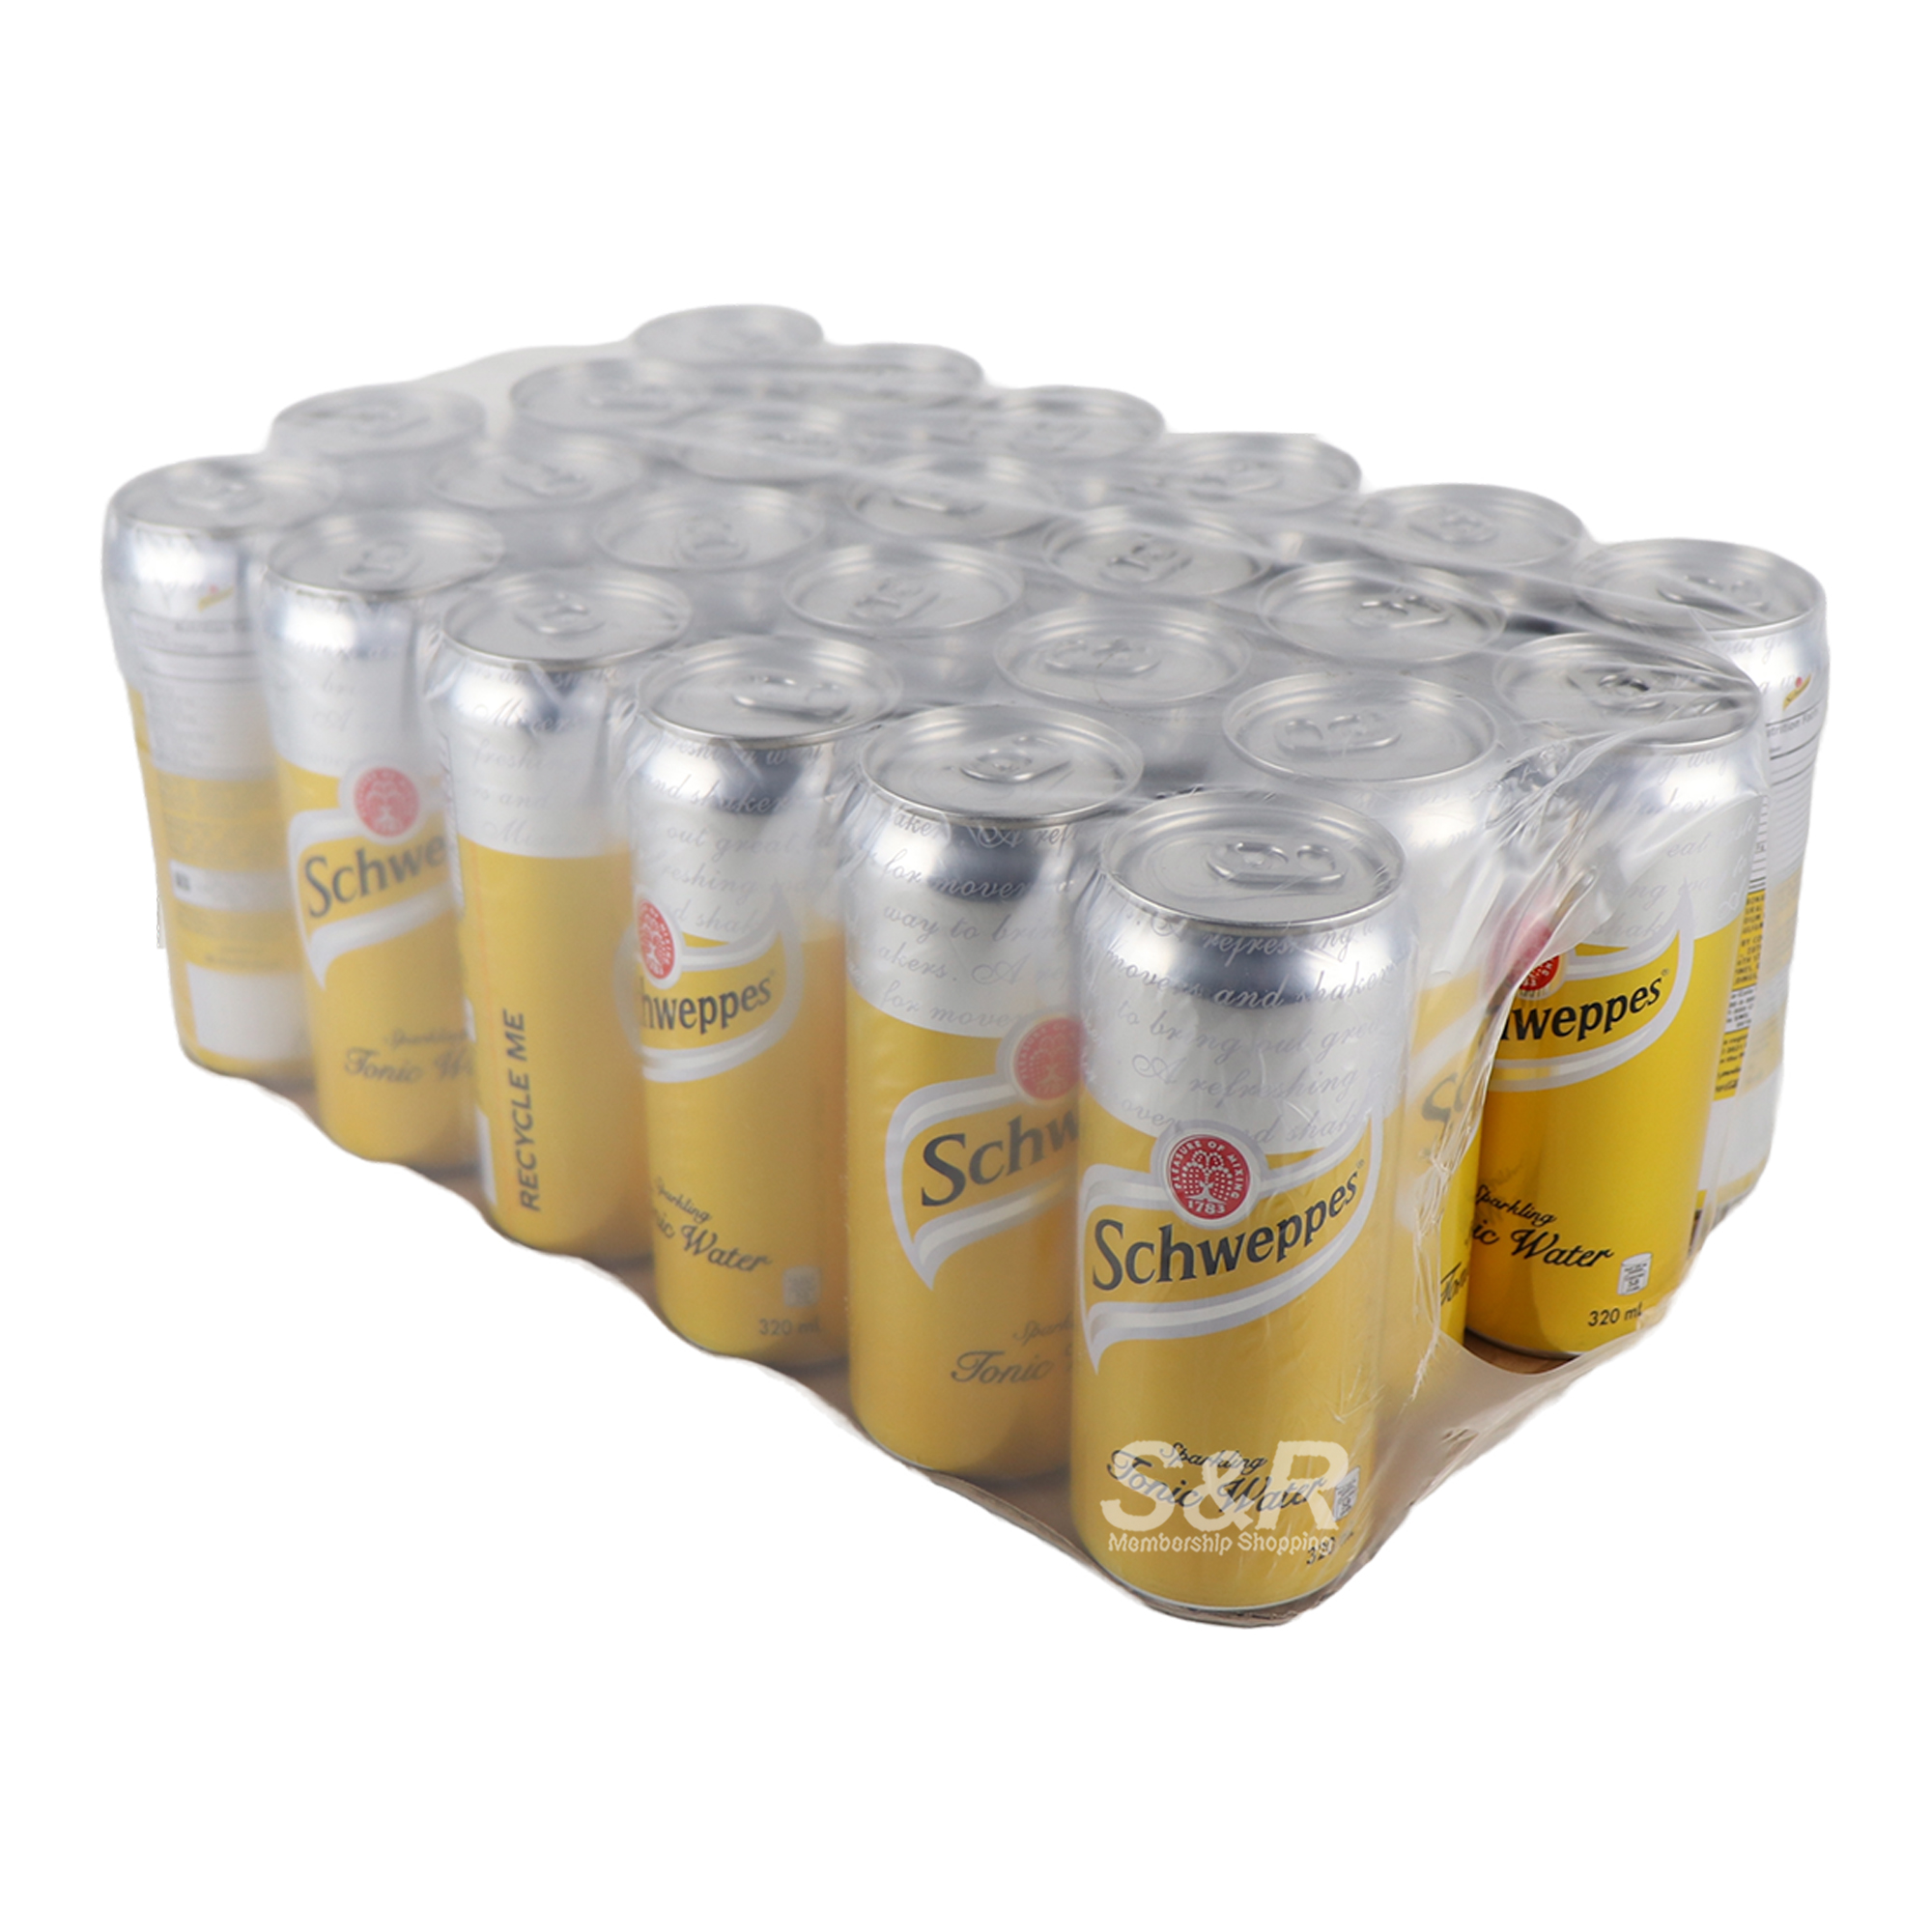 Schweppes Sparkling Tonic Water 24 cans